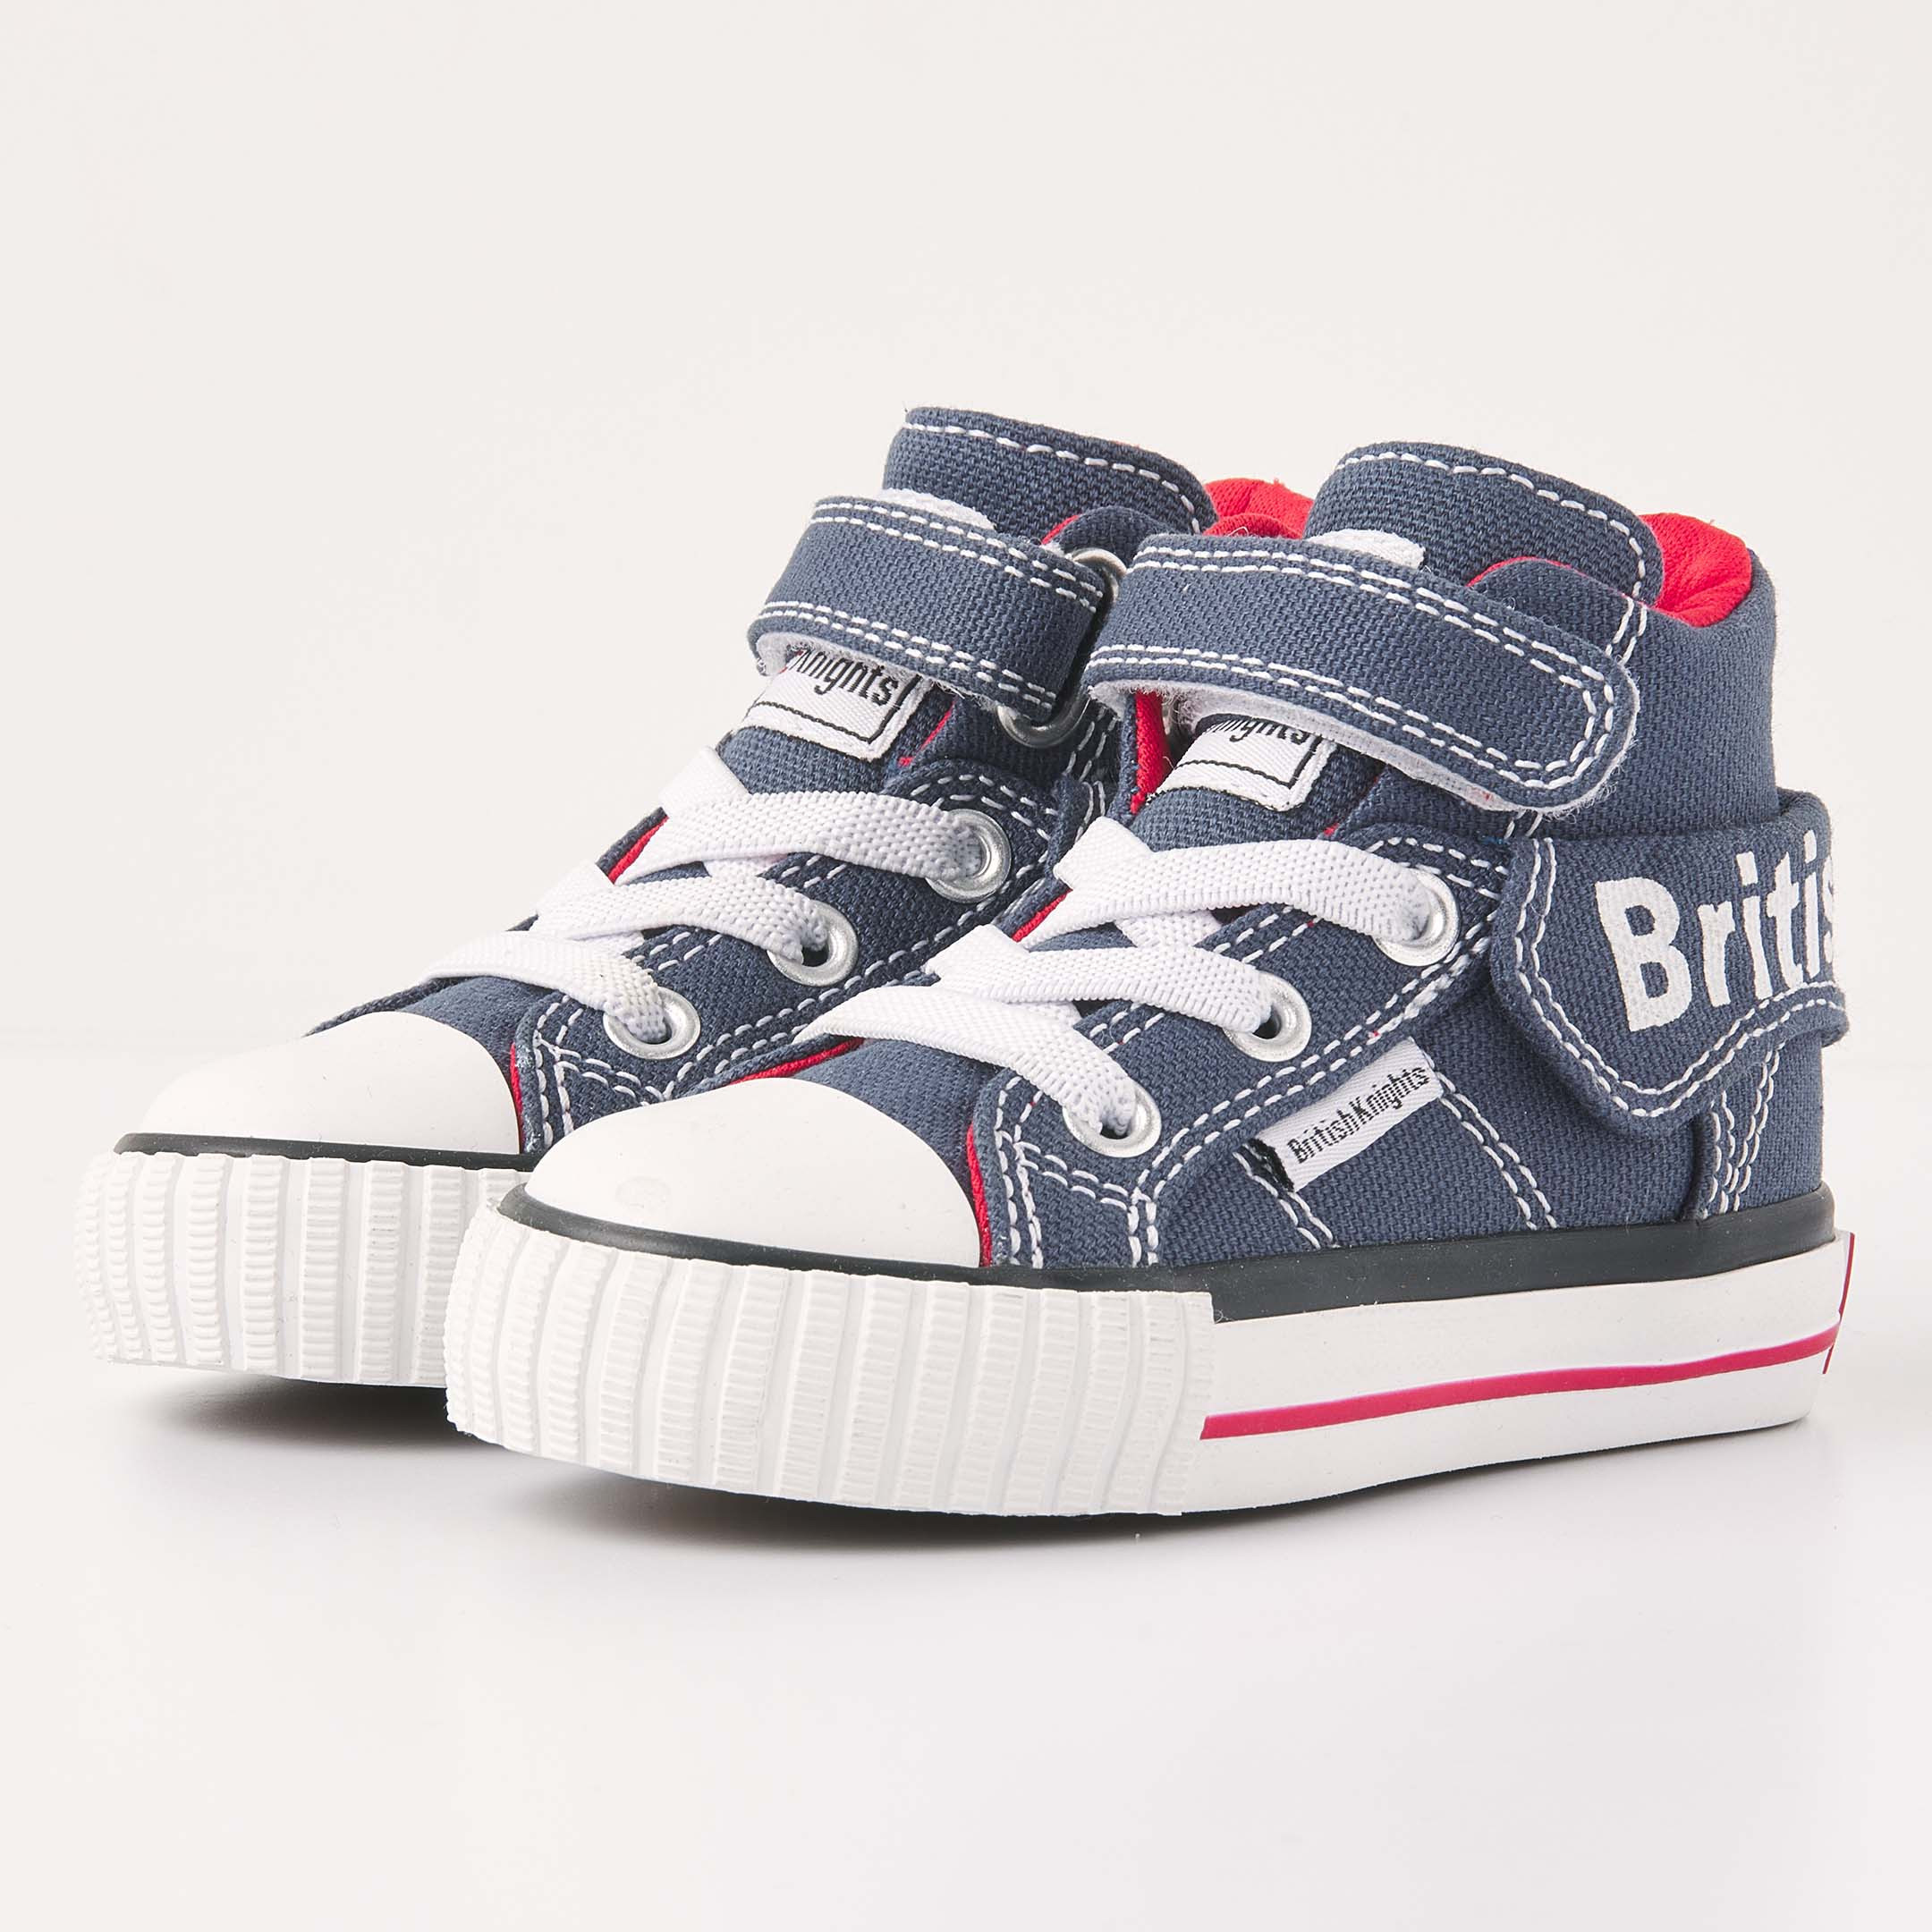 British Knights Sneaker Front view  B51-3742I-05 ROCO HIGH-TOP MALE